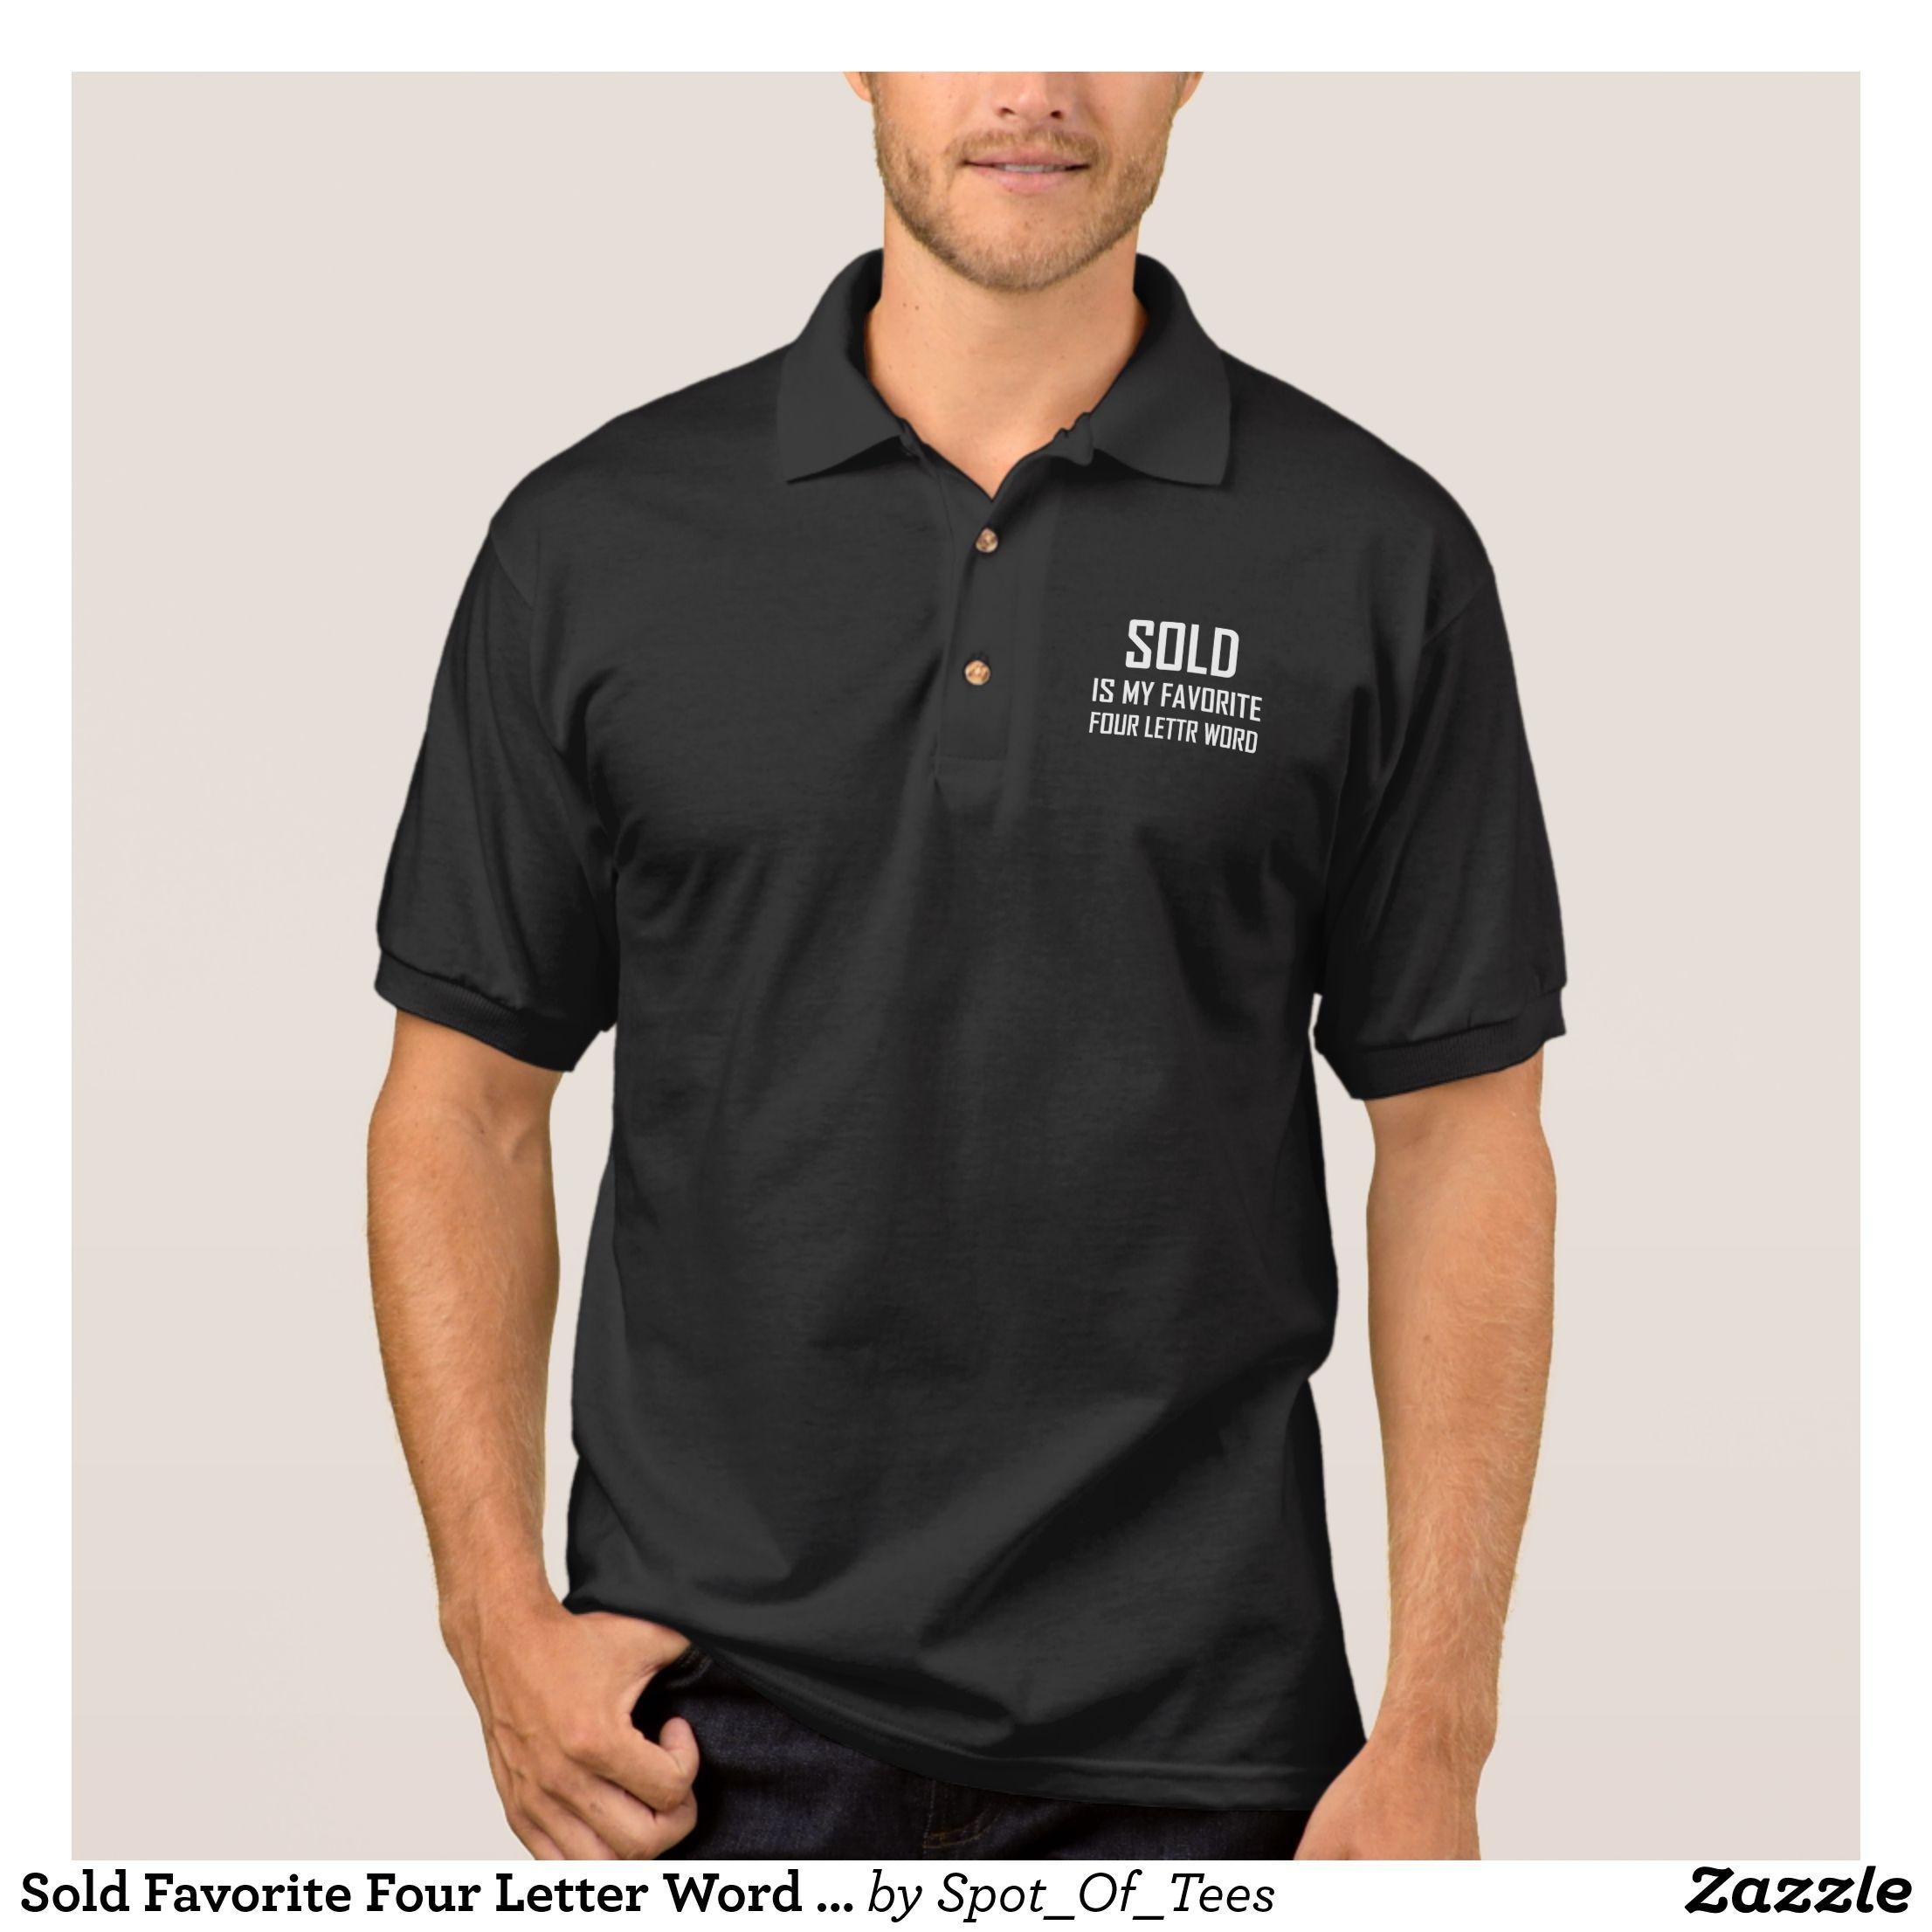 Four Letter Clothing and Apparel Logo - Sold Favorite Four Letter Word Funny Polo Shirt. MEN'S POLO